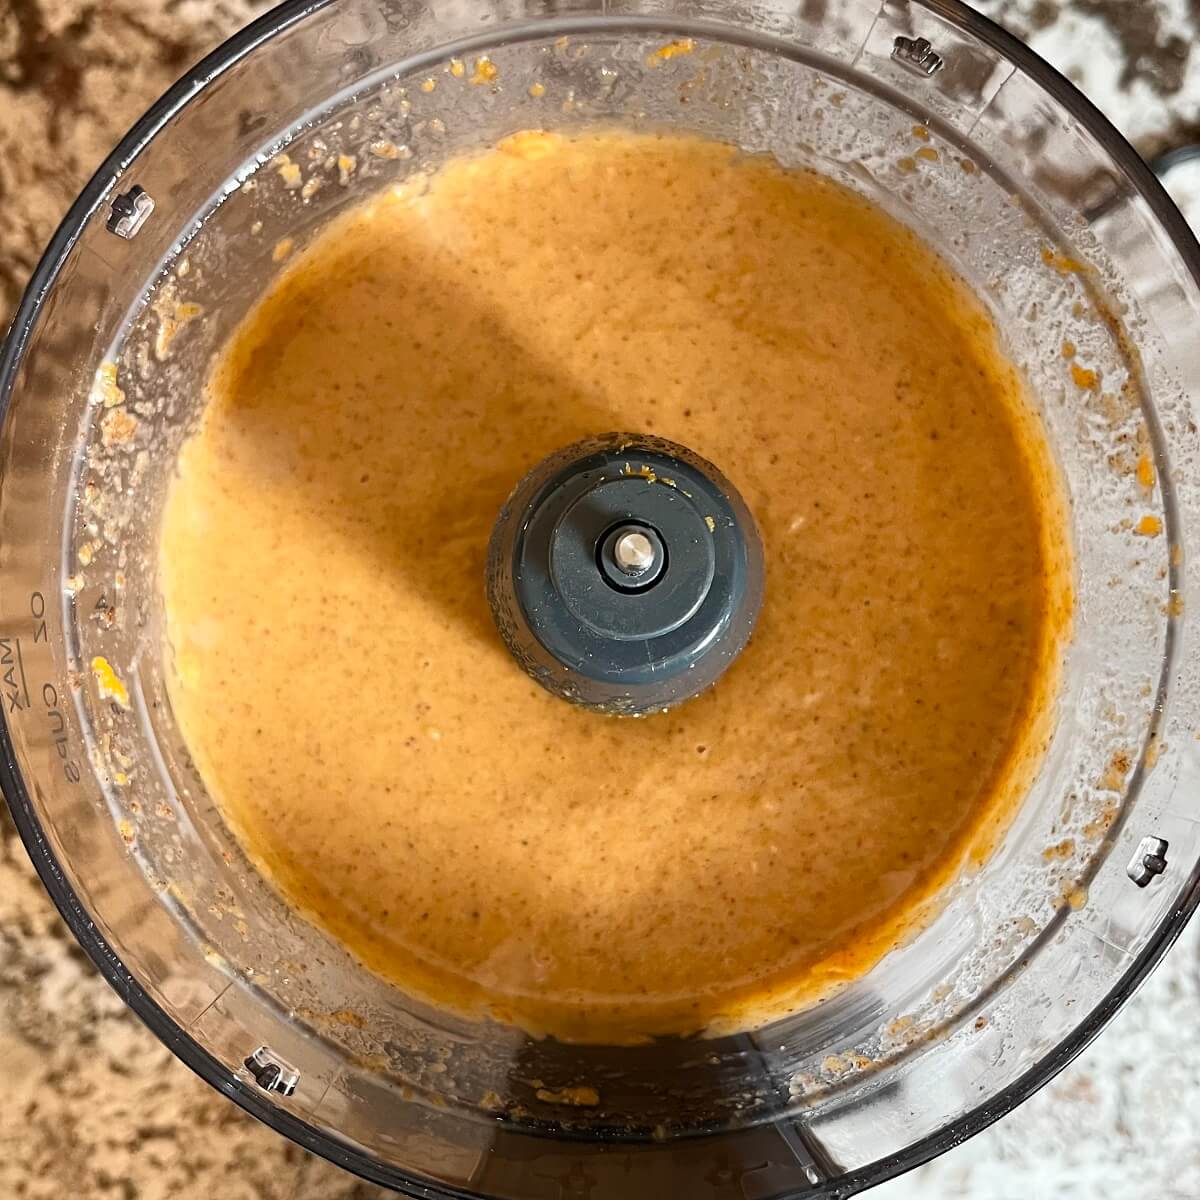 Wet ingredients for sweet potato bread blended in a food processor.